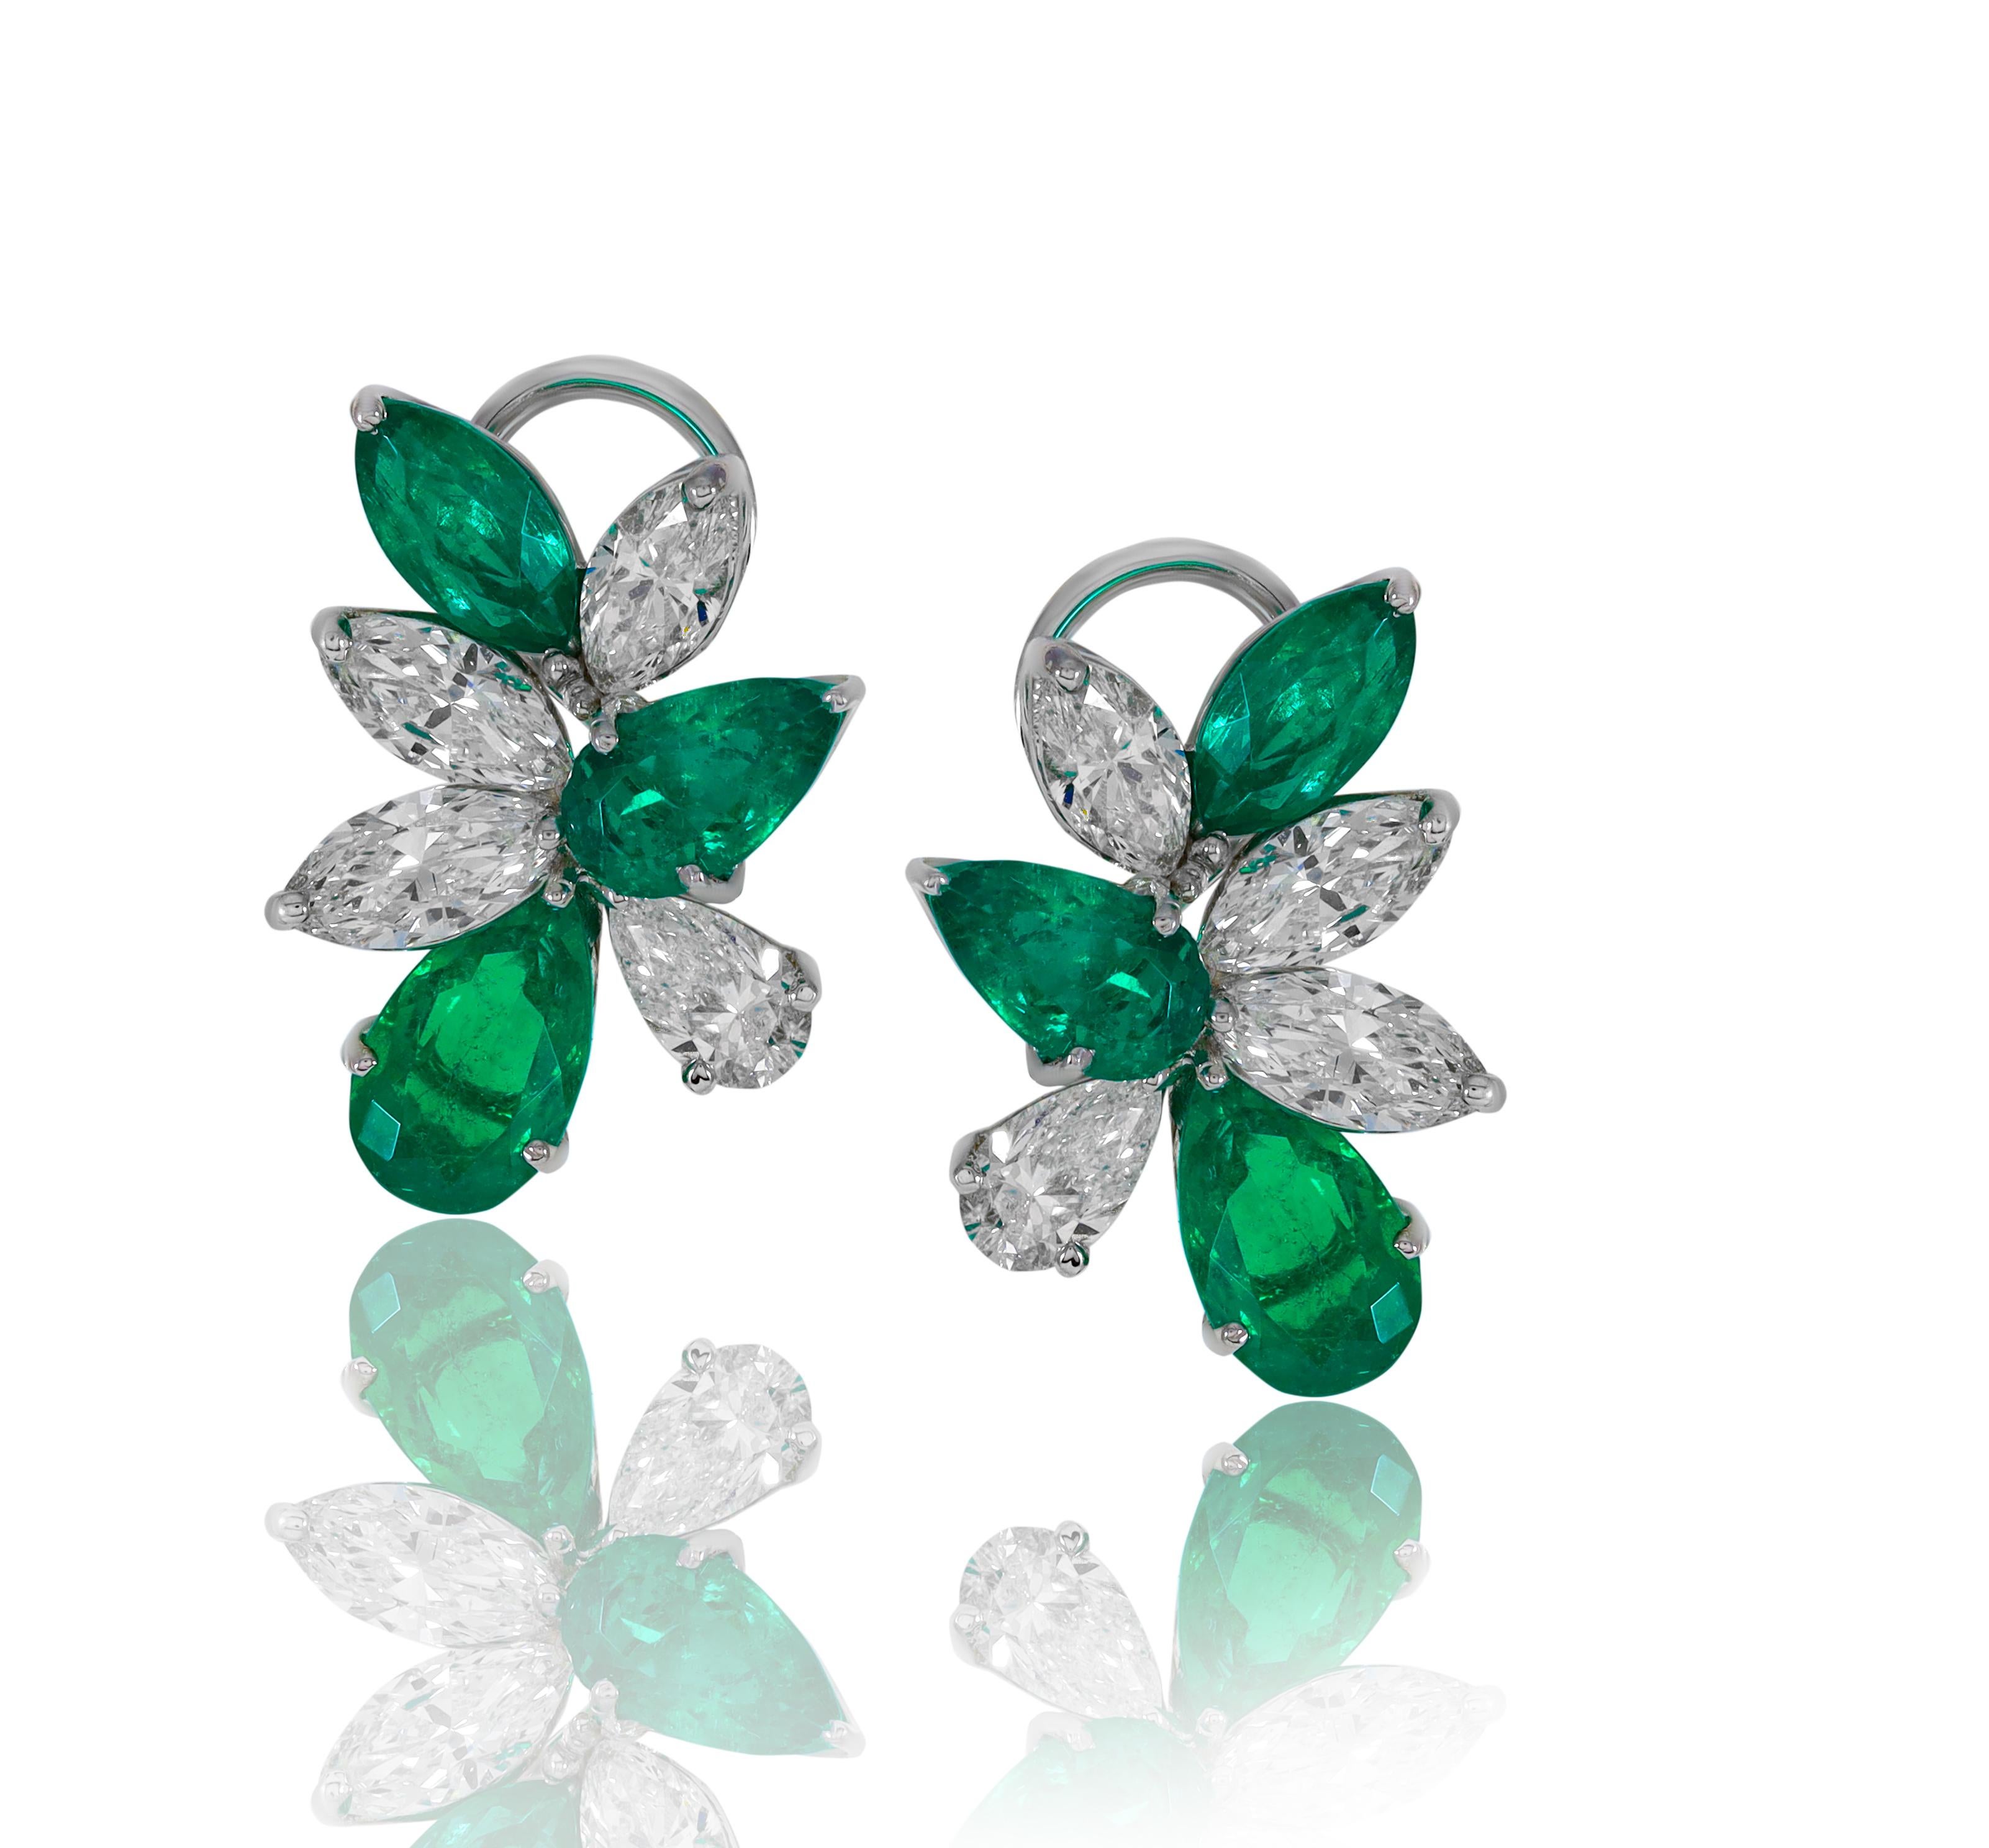 Platinum Colombian Emerald And Diamond Earrings Marquise And Pear Shape Emeralds 6.71cts And Marquise And Pear Shape Diamonds 4.01cts.
